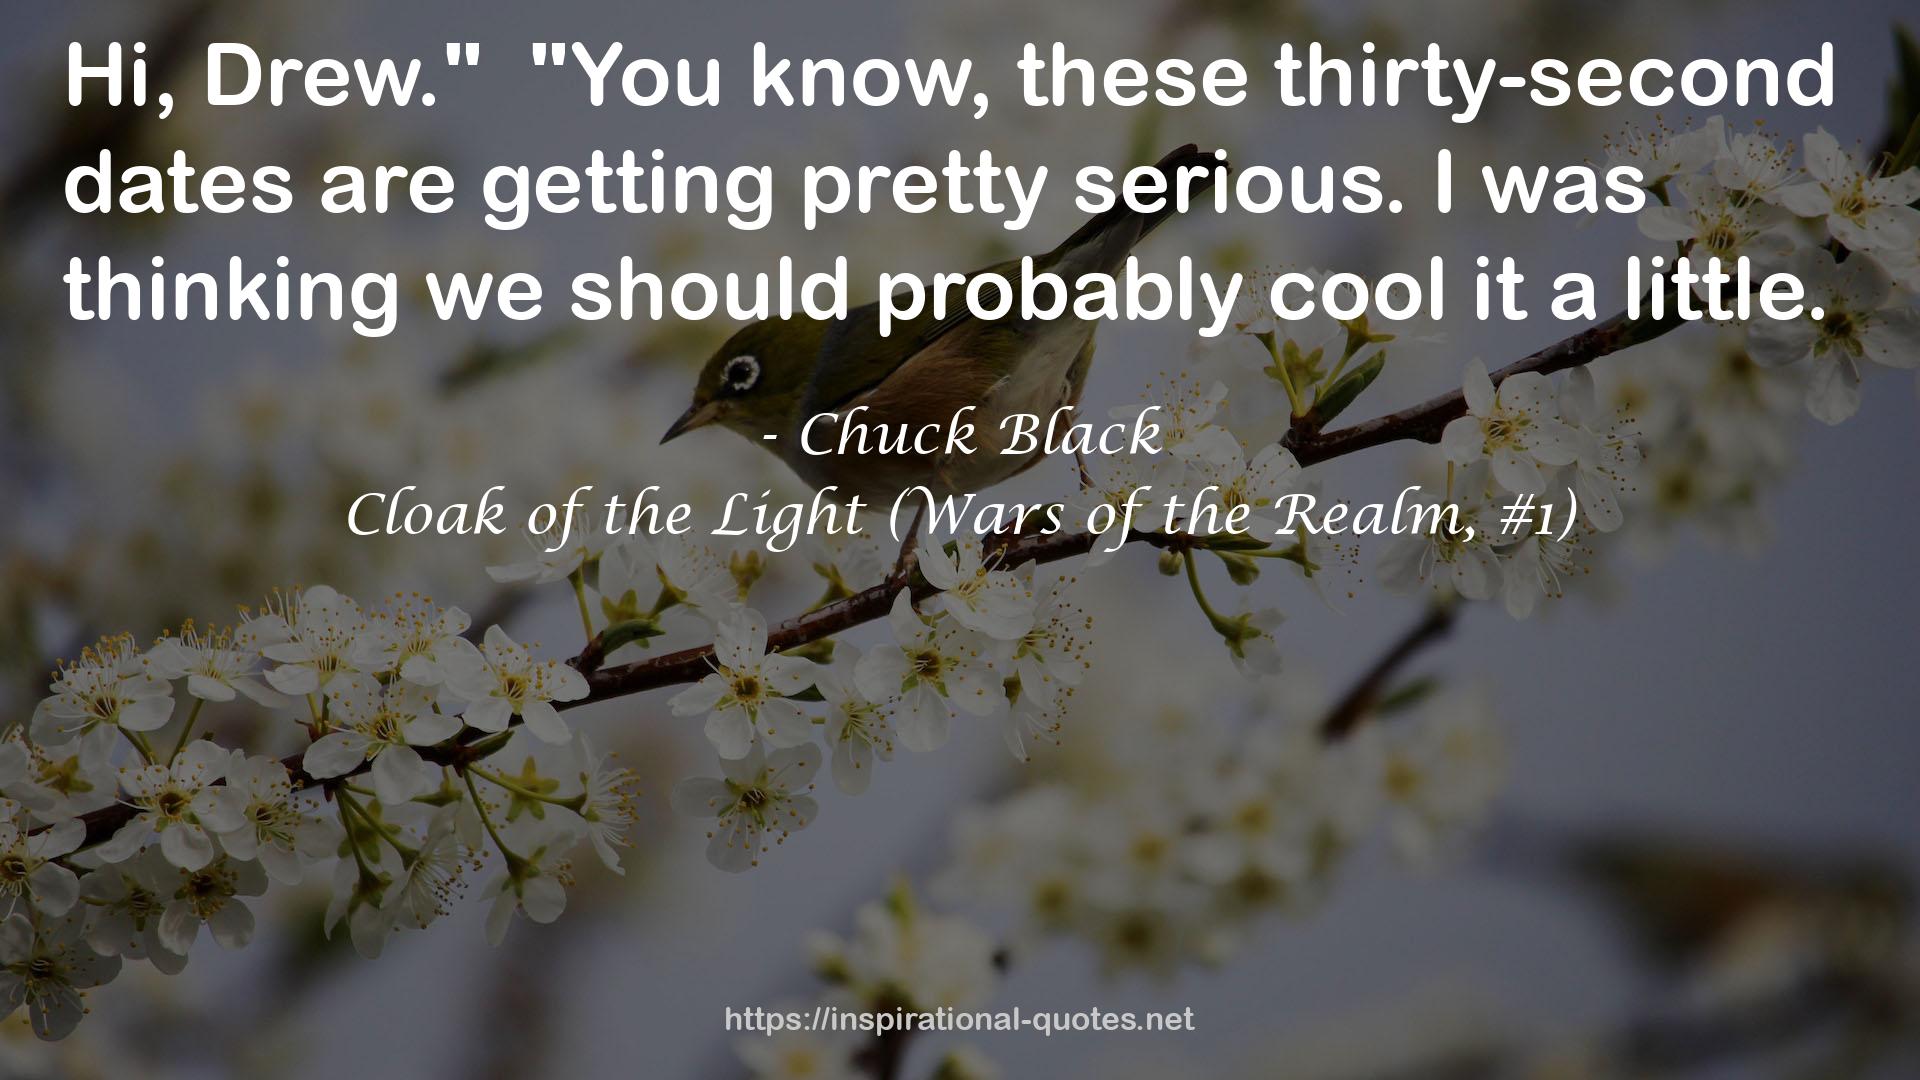 Cloak of the Light (Wars of the Realm, #1) QUOTES